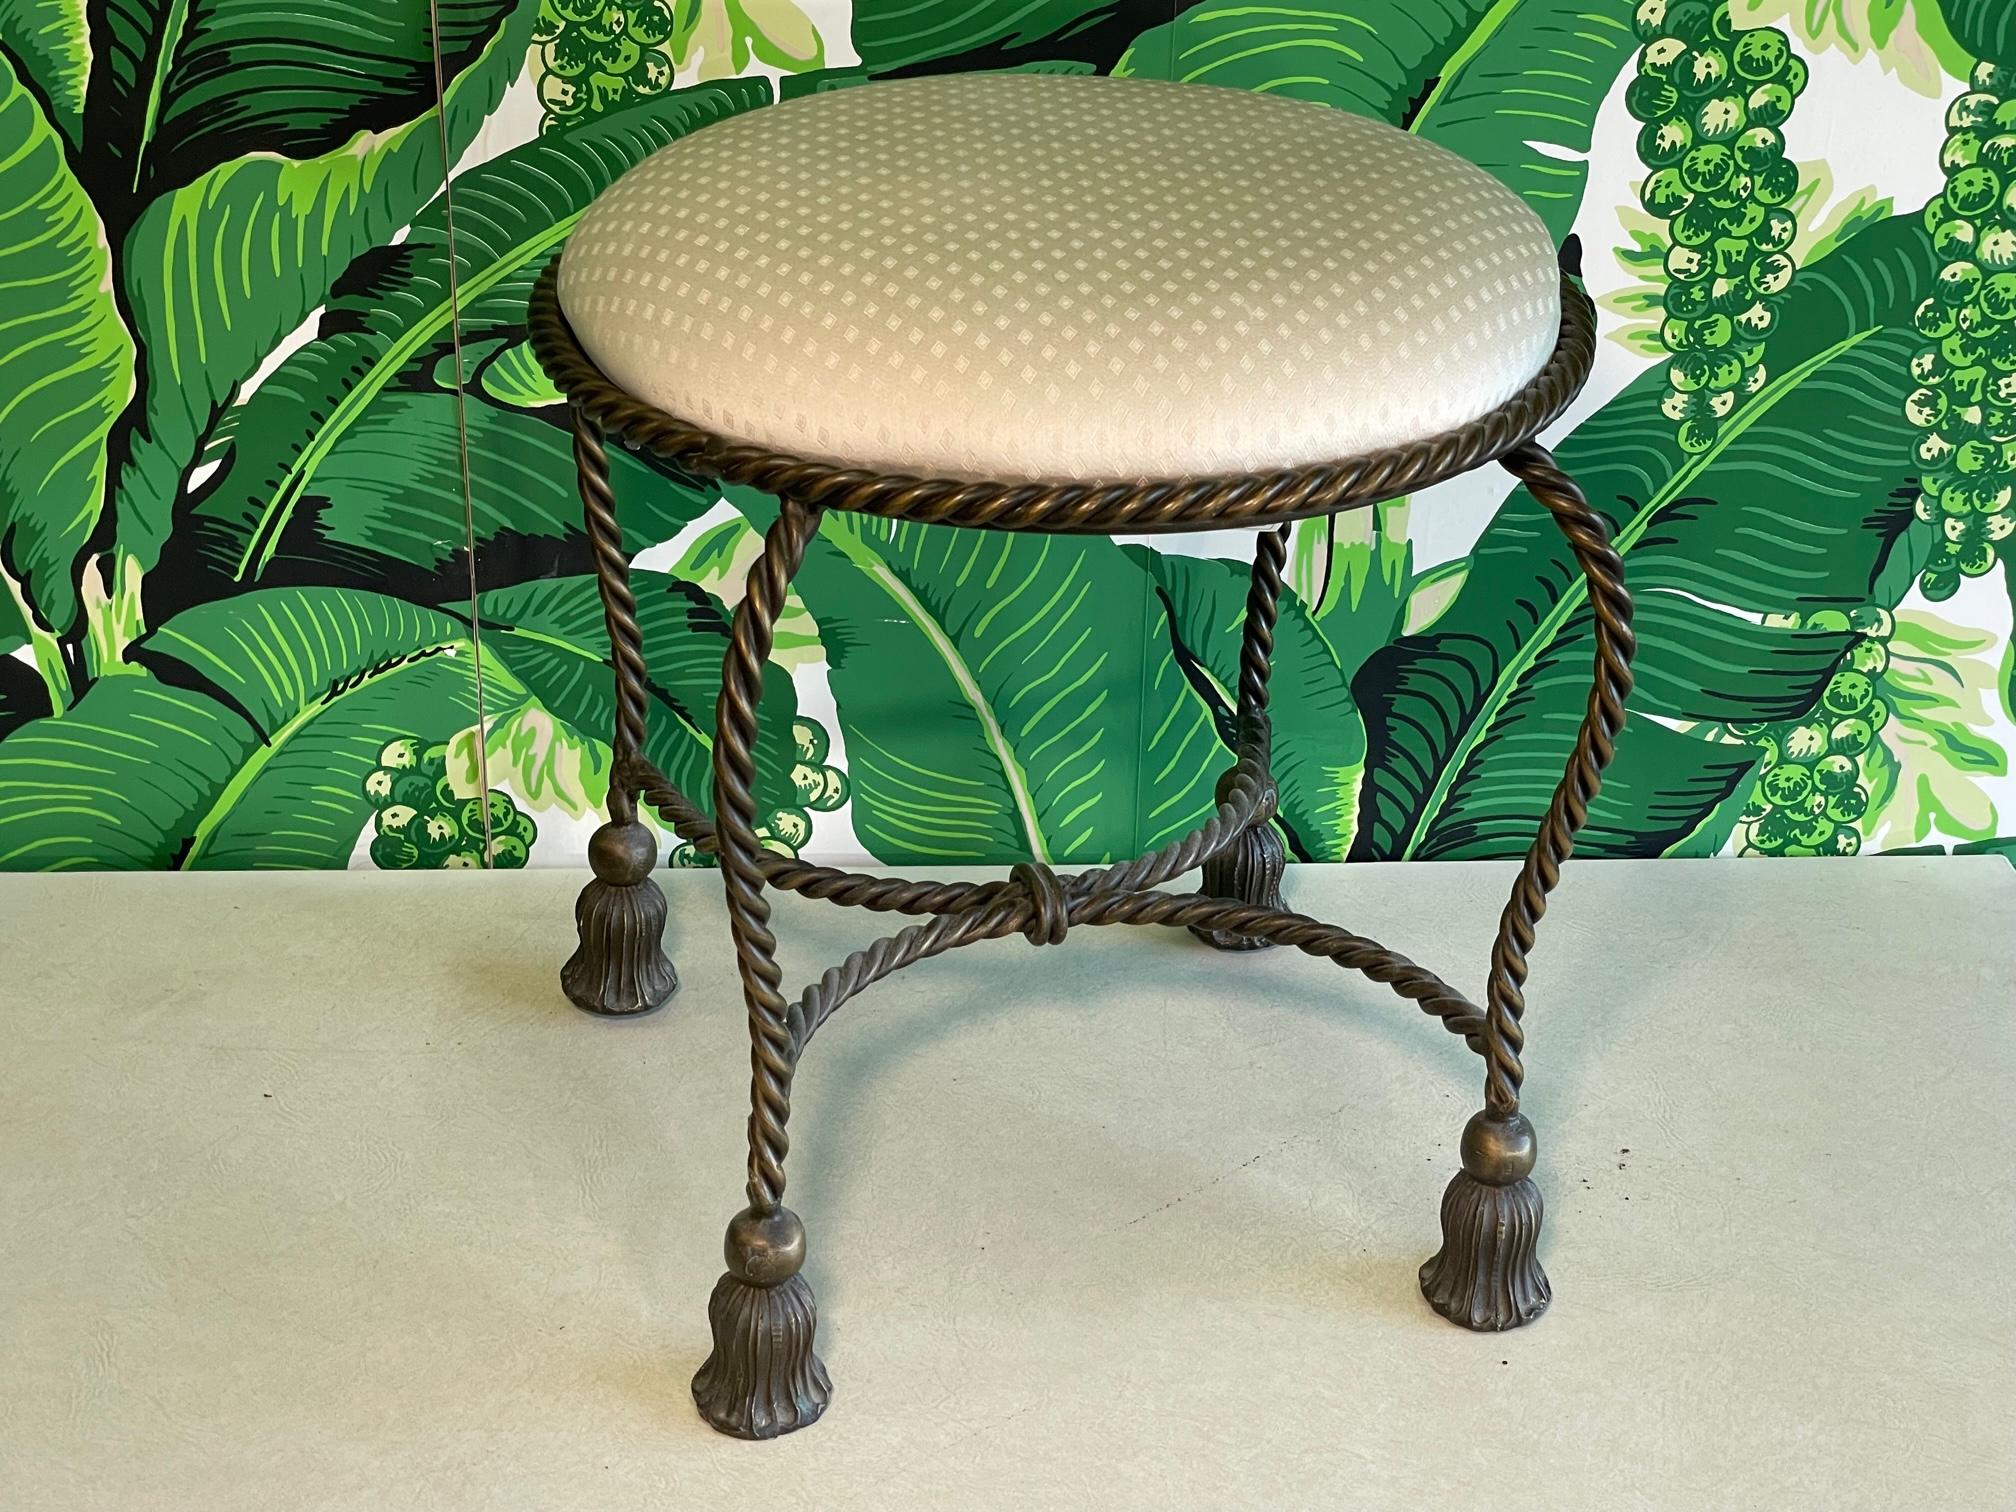 Heavy bronze vanity stool features a twisted rope motif and tassel feet. Good condition with minor imperfections consistent with age, see photos for condition details. 
For a shipping quote to your exact zip code, please message us.